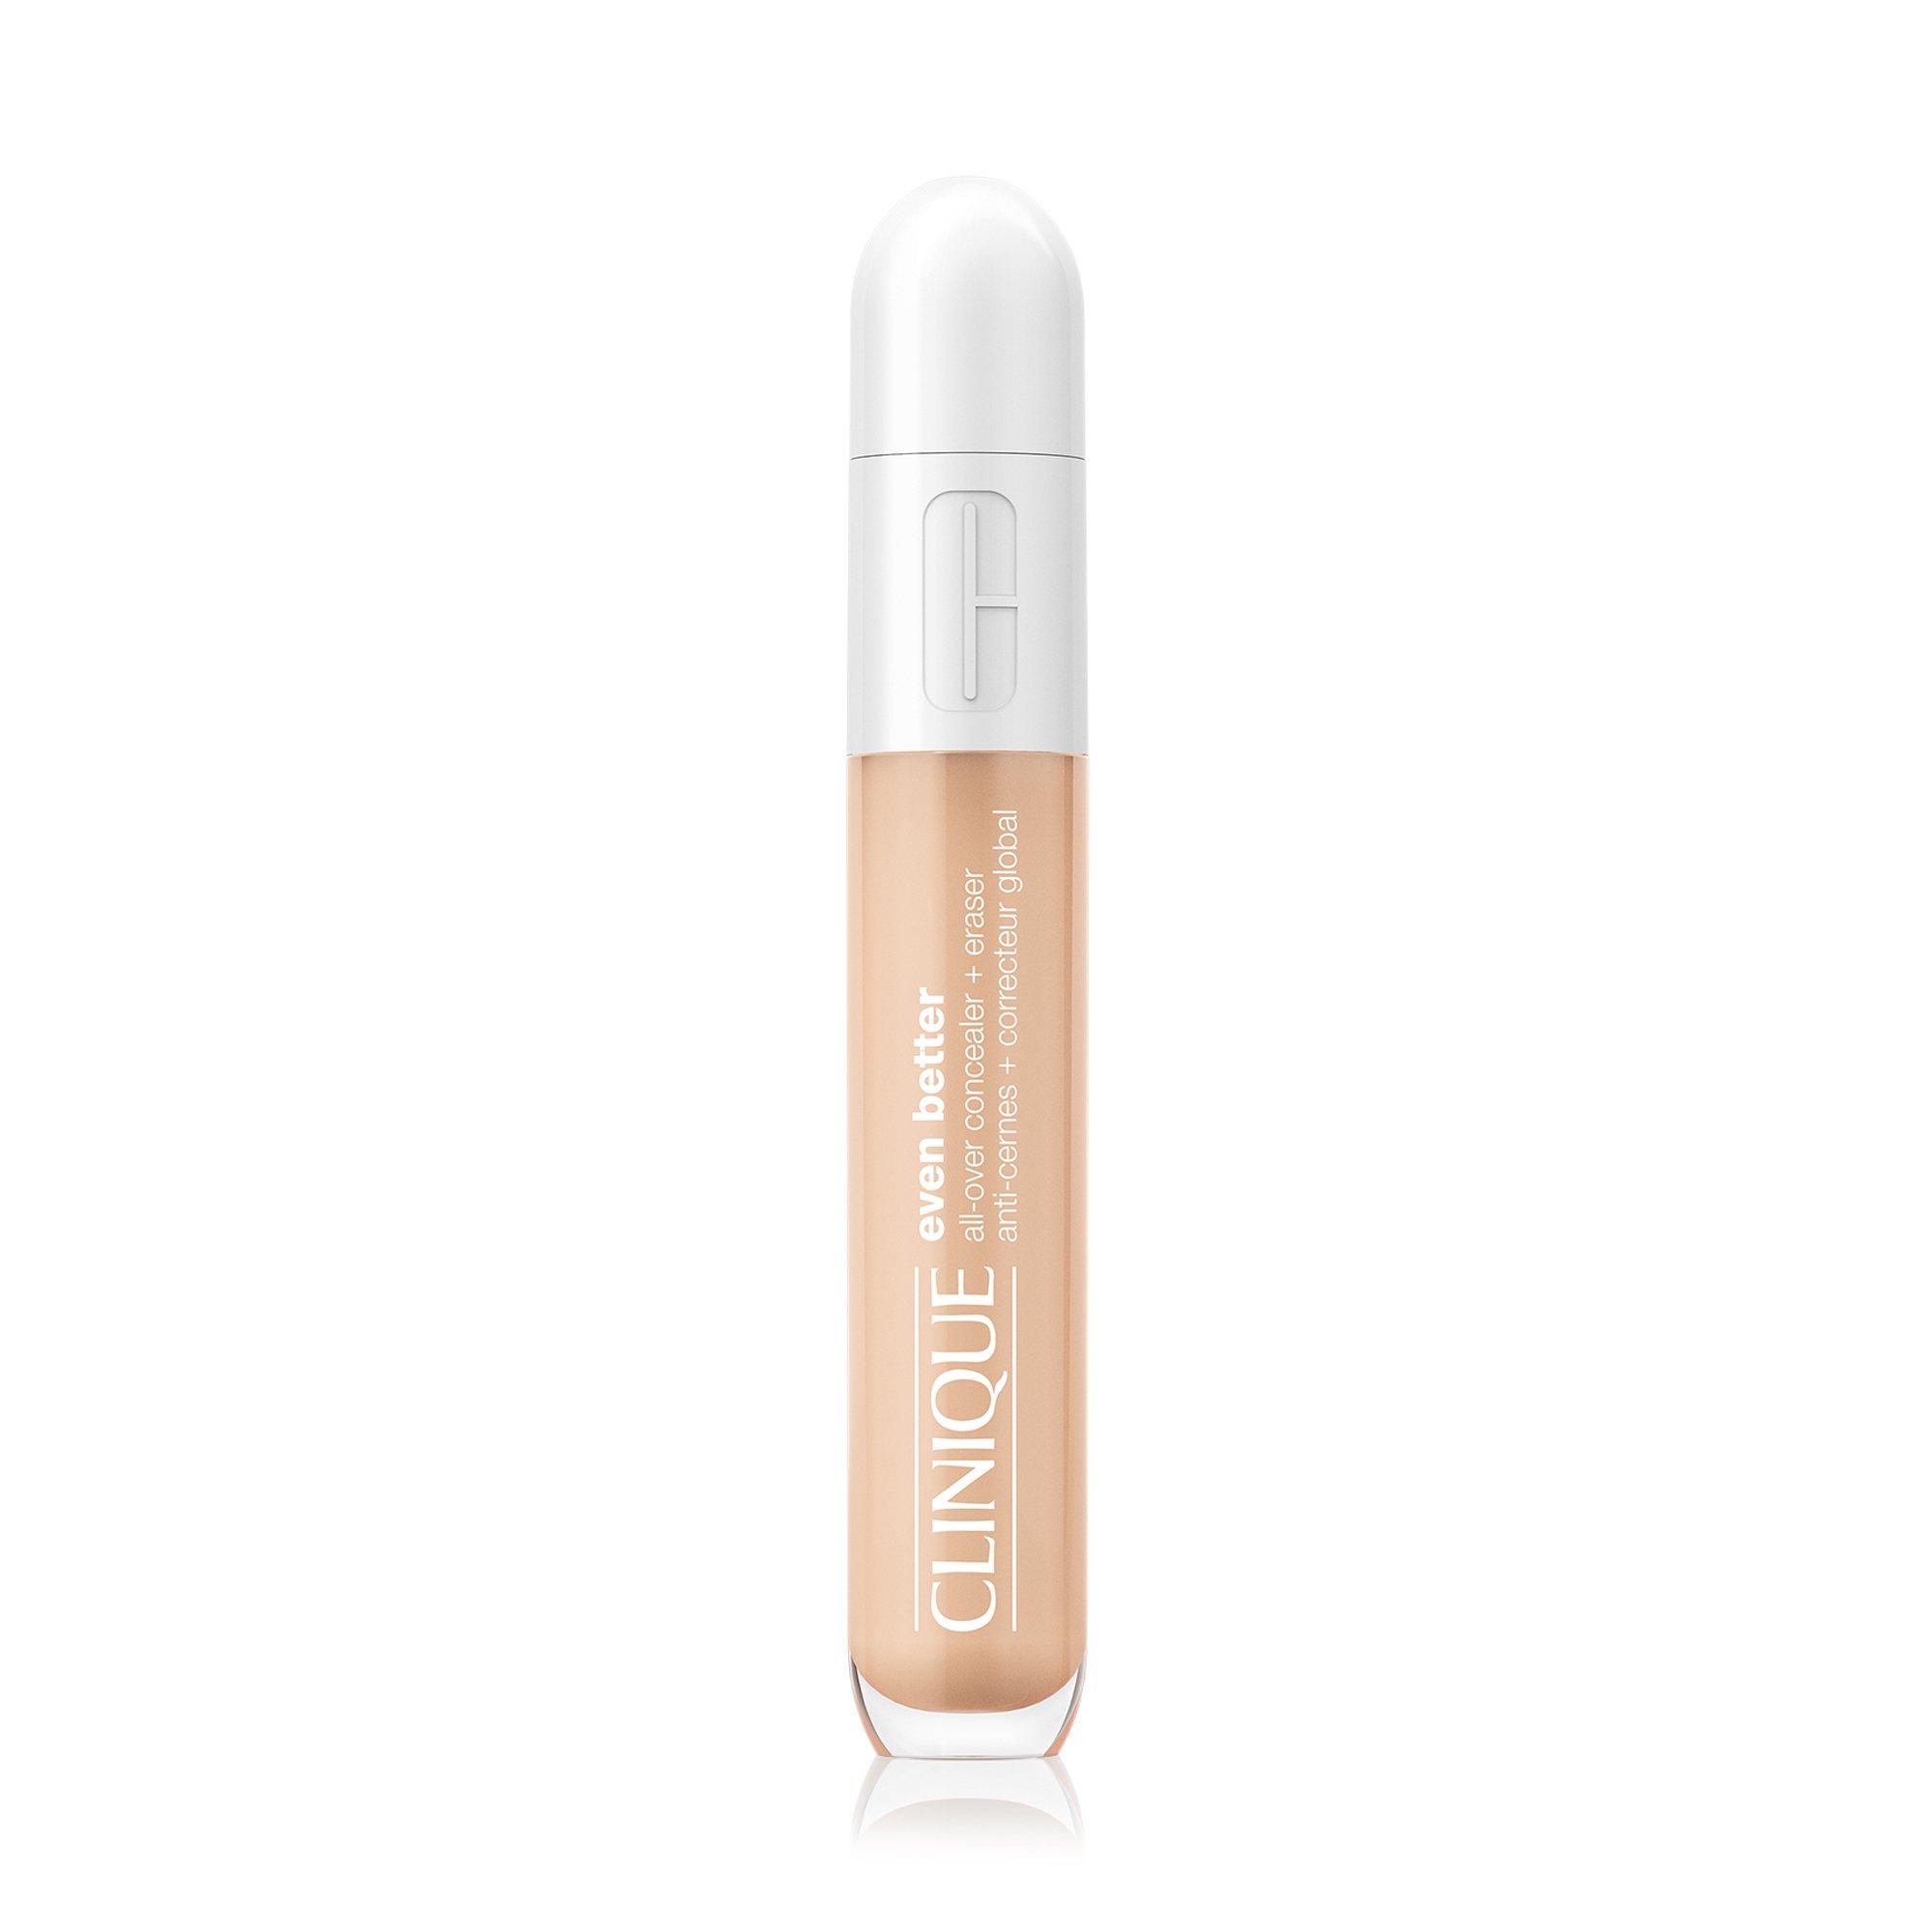 Image of CLINIQUE Even Better Makeup SPF 15 - 6ml